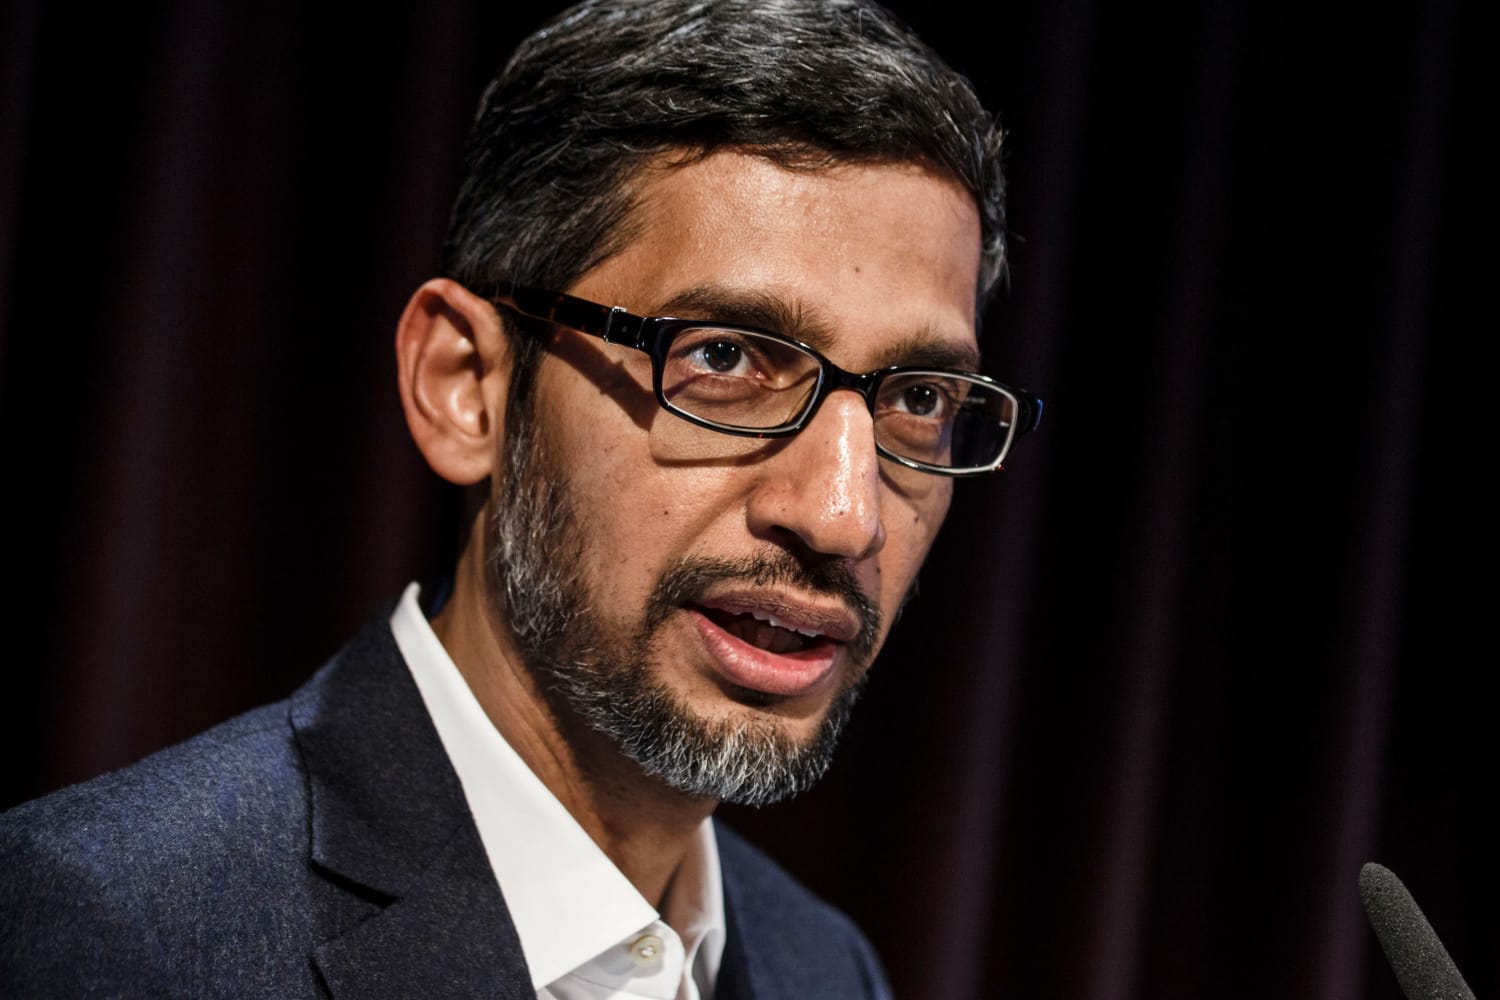 Google will no longer hold weekly all-hands meetings amid growing workplace tensions